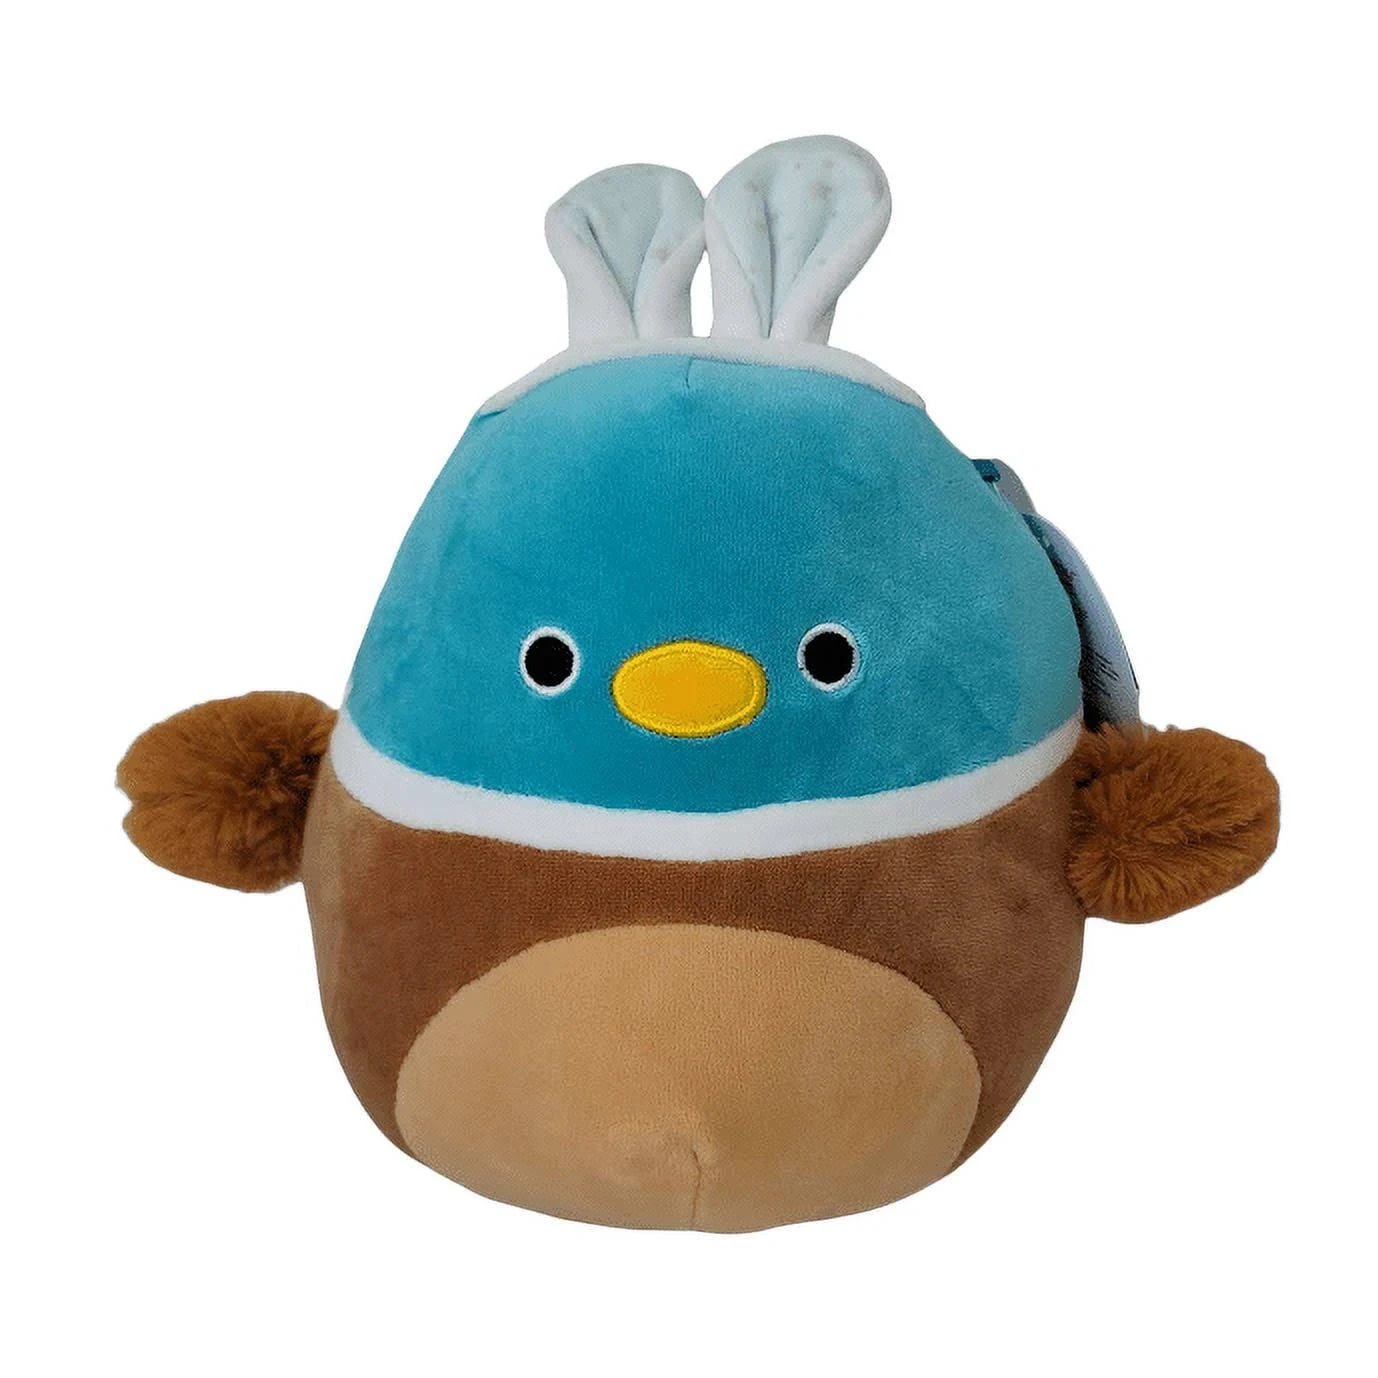 Squishmallow Daka the Duck with Bunny Ears (Blue) - Cuddly Plush Toy for All Ages | Image